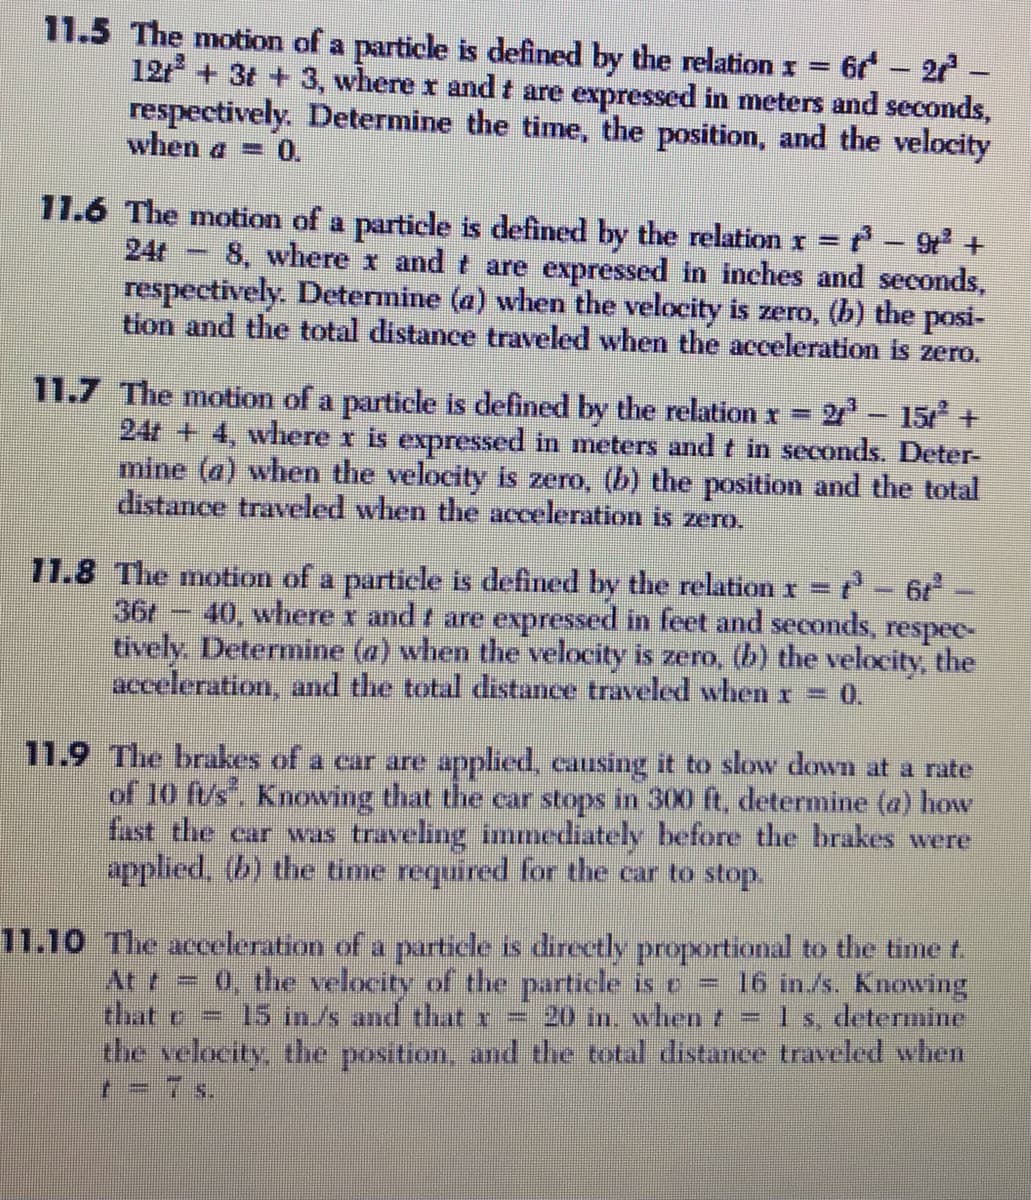 11.5 The motion of a particle is defined by the relation x =
12t + 3t +3, where r and t are expressed in meters and seconds,
respectively. Determine the time, the position, and the velocity
when a = 0.
6 – 27
11.6 The motion of a particle is defined by the relation r =
24t
8, where x and t are expressed in inches and seconds,
respectively. Determine (a) when the velocity is zero, (b) the posi-
tion and the total distance traveled when the acceleration is zero.
11.7 The motion of a particle is defined by the relation r
24t + 4, where r is expressed in meters and t in seconds. Deter-
mine (a) when the velocity is zero, (b) the position and the total
distance traveled when the acceleration is zero.
= 2 - 15
+.
71.8 The motion of a particle is defined by the relation r = -6-
36r
40, where r and t are expressed in feet and seconds, respec-
tively. Determine (a) when the velocity is zero, (b) the velocity, the
acceleration, and the total distance traveled when x = 0.
11.9 The brakes of a car are applied, causing it to slow down at a rate
of 10 f/s. Knowing that the car stops in 300 ft, determine (a) how
fast the ear was traveling immediately before the brakes were
applied, (b) the time required for the car to stop.
11.10 The acceleration of a paurticle is directly proportional to the time t.
16 in./s. Knowing
1 s, determine
At t = 0, the velocity of the particle is e
that c
the velocity, the position, and the total distance traveled when
r = 7 s.
15 in./s and that x
20 in. whent
